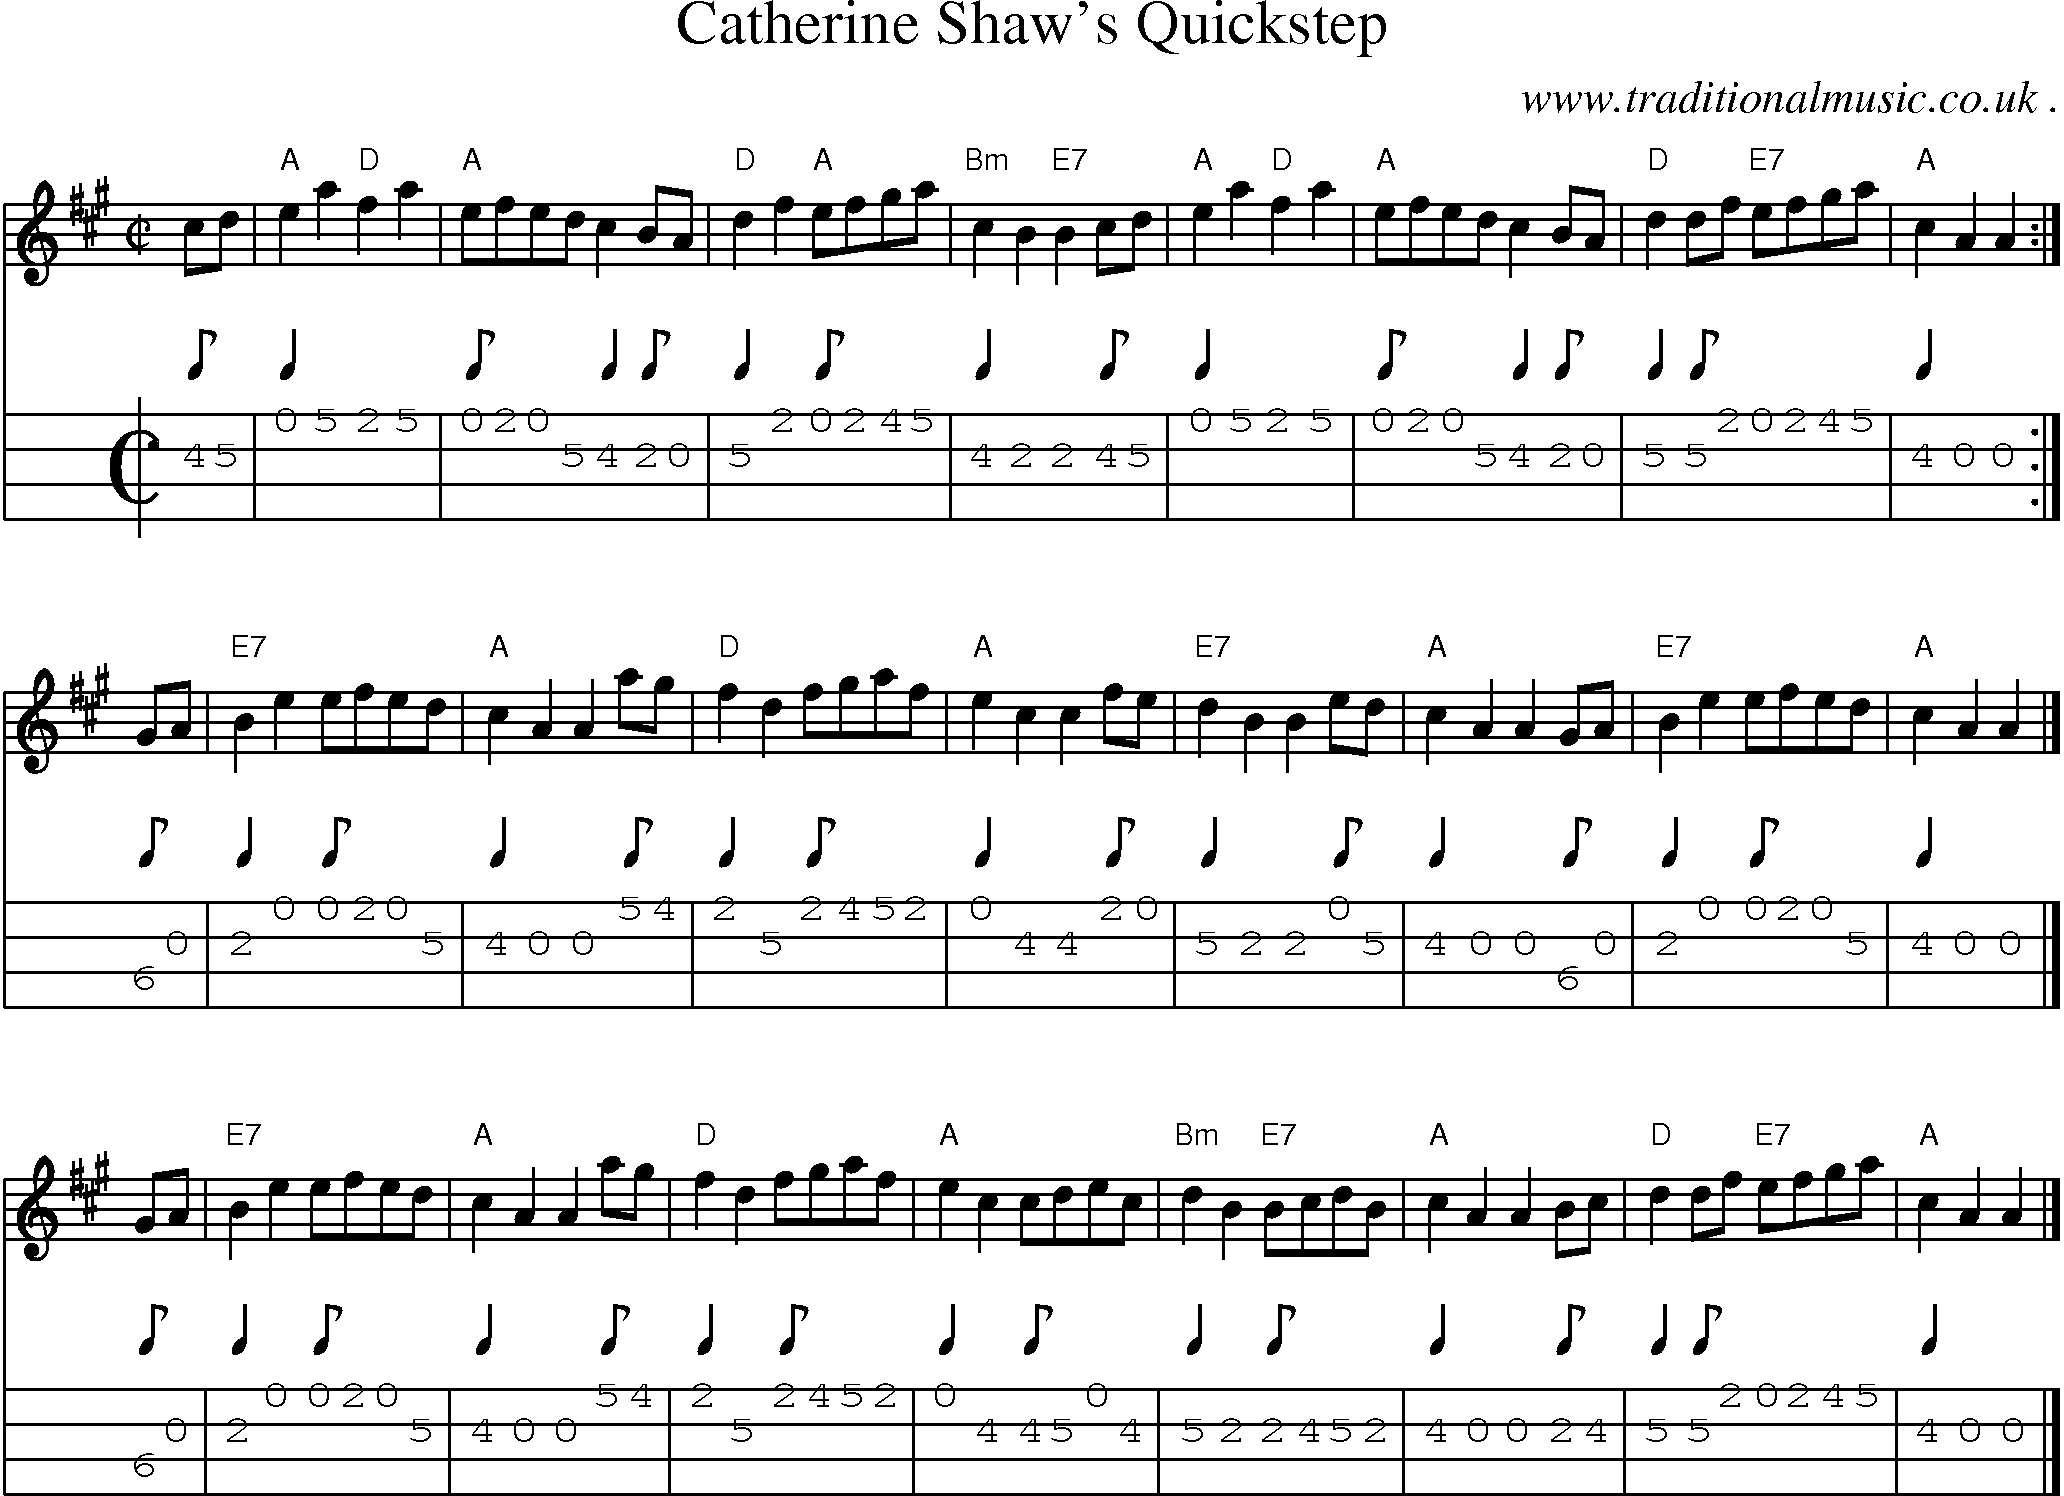 Sheet-music  score, Chords and Mandolin Tabs for Catherine Shaws Quickstep